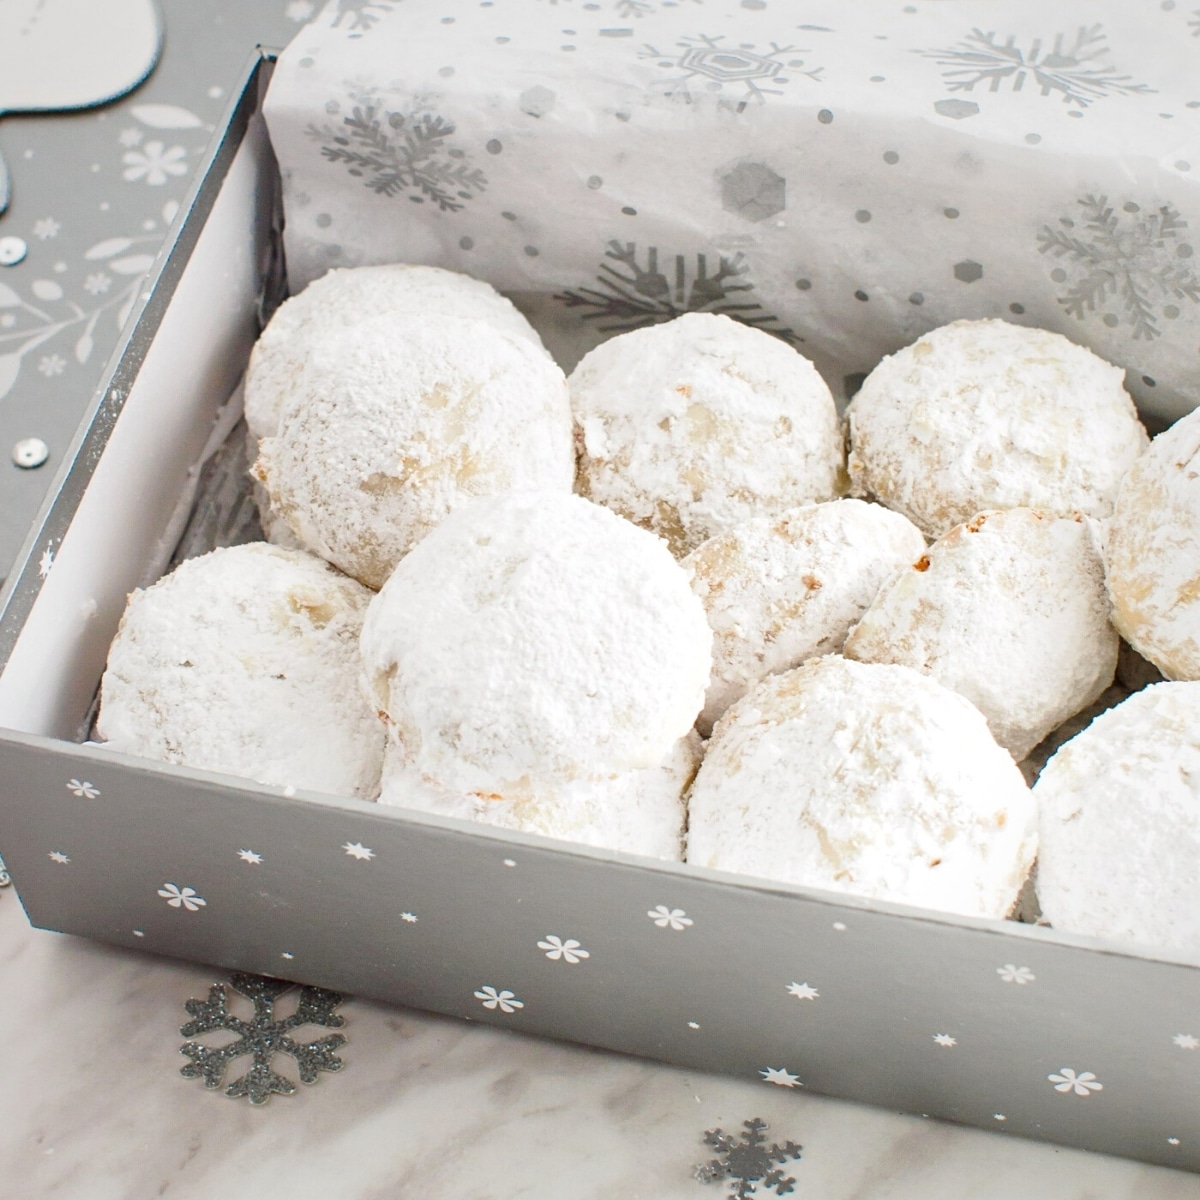 Almond cookies covered with powdered sugar in a gift box.